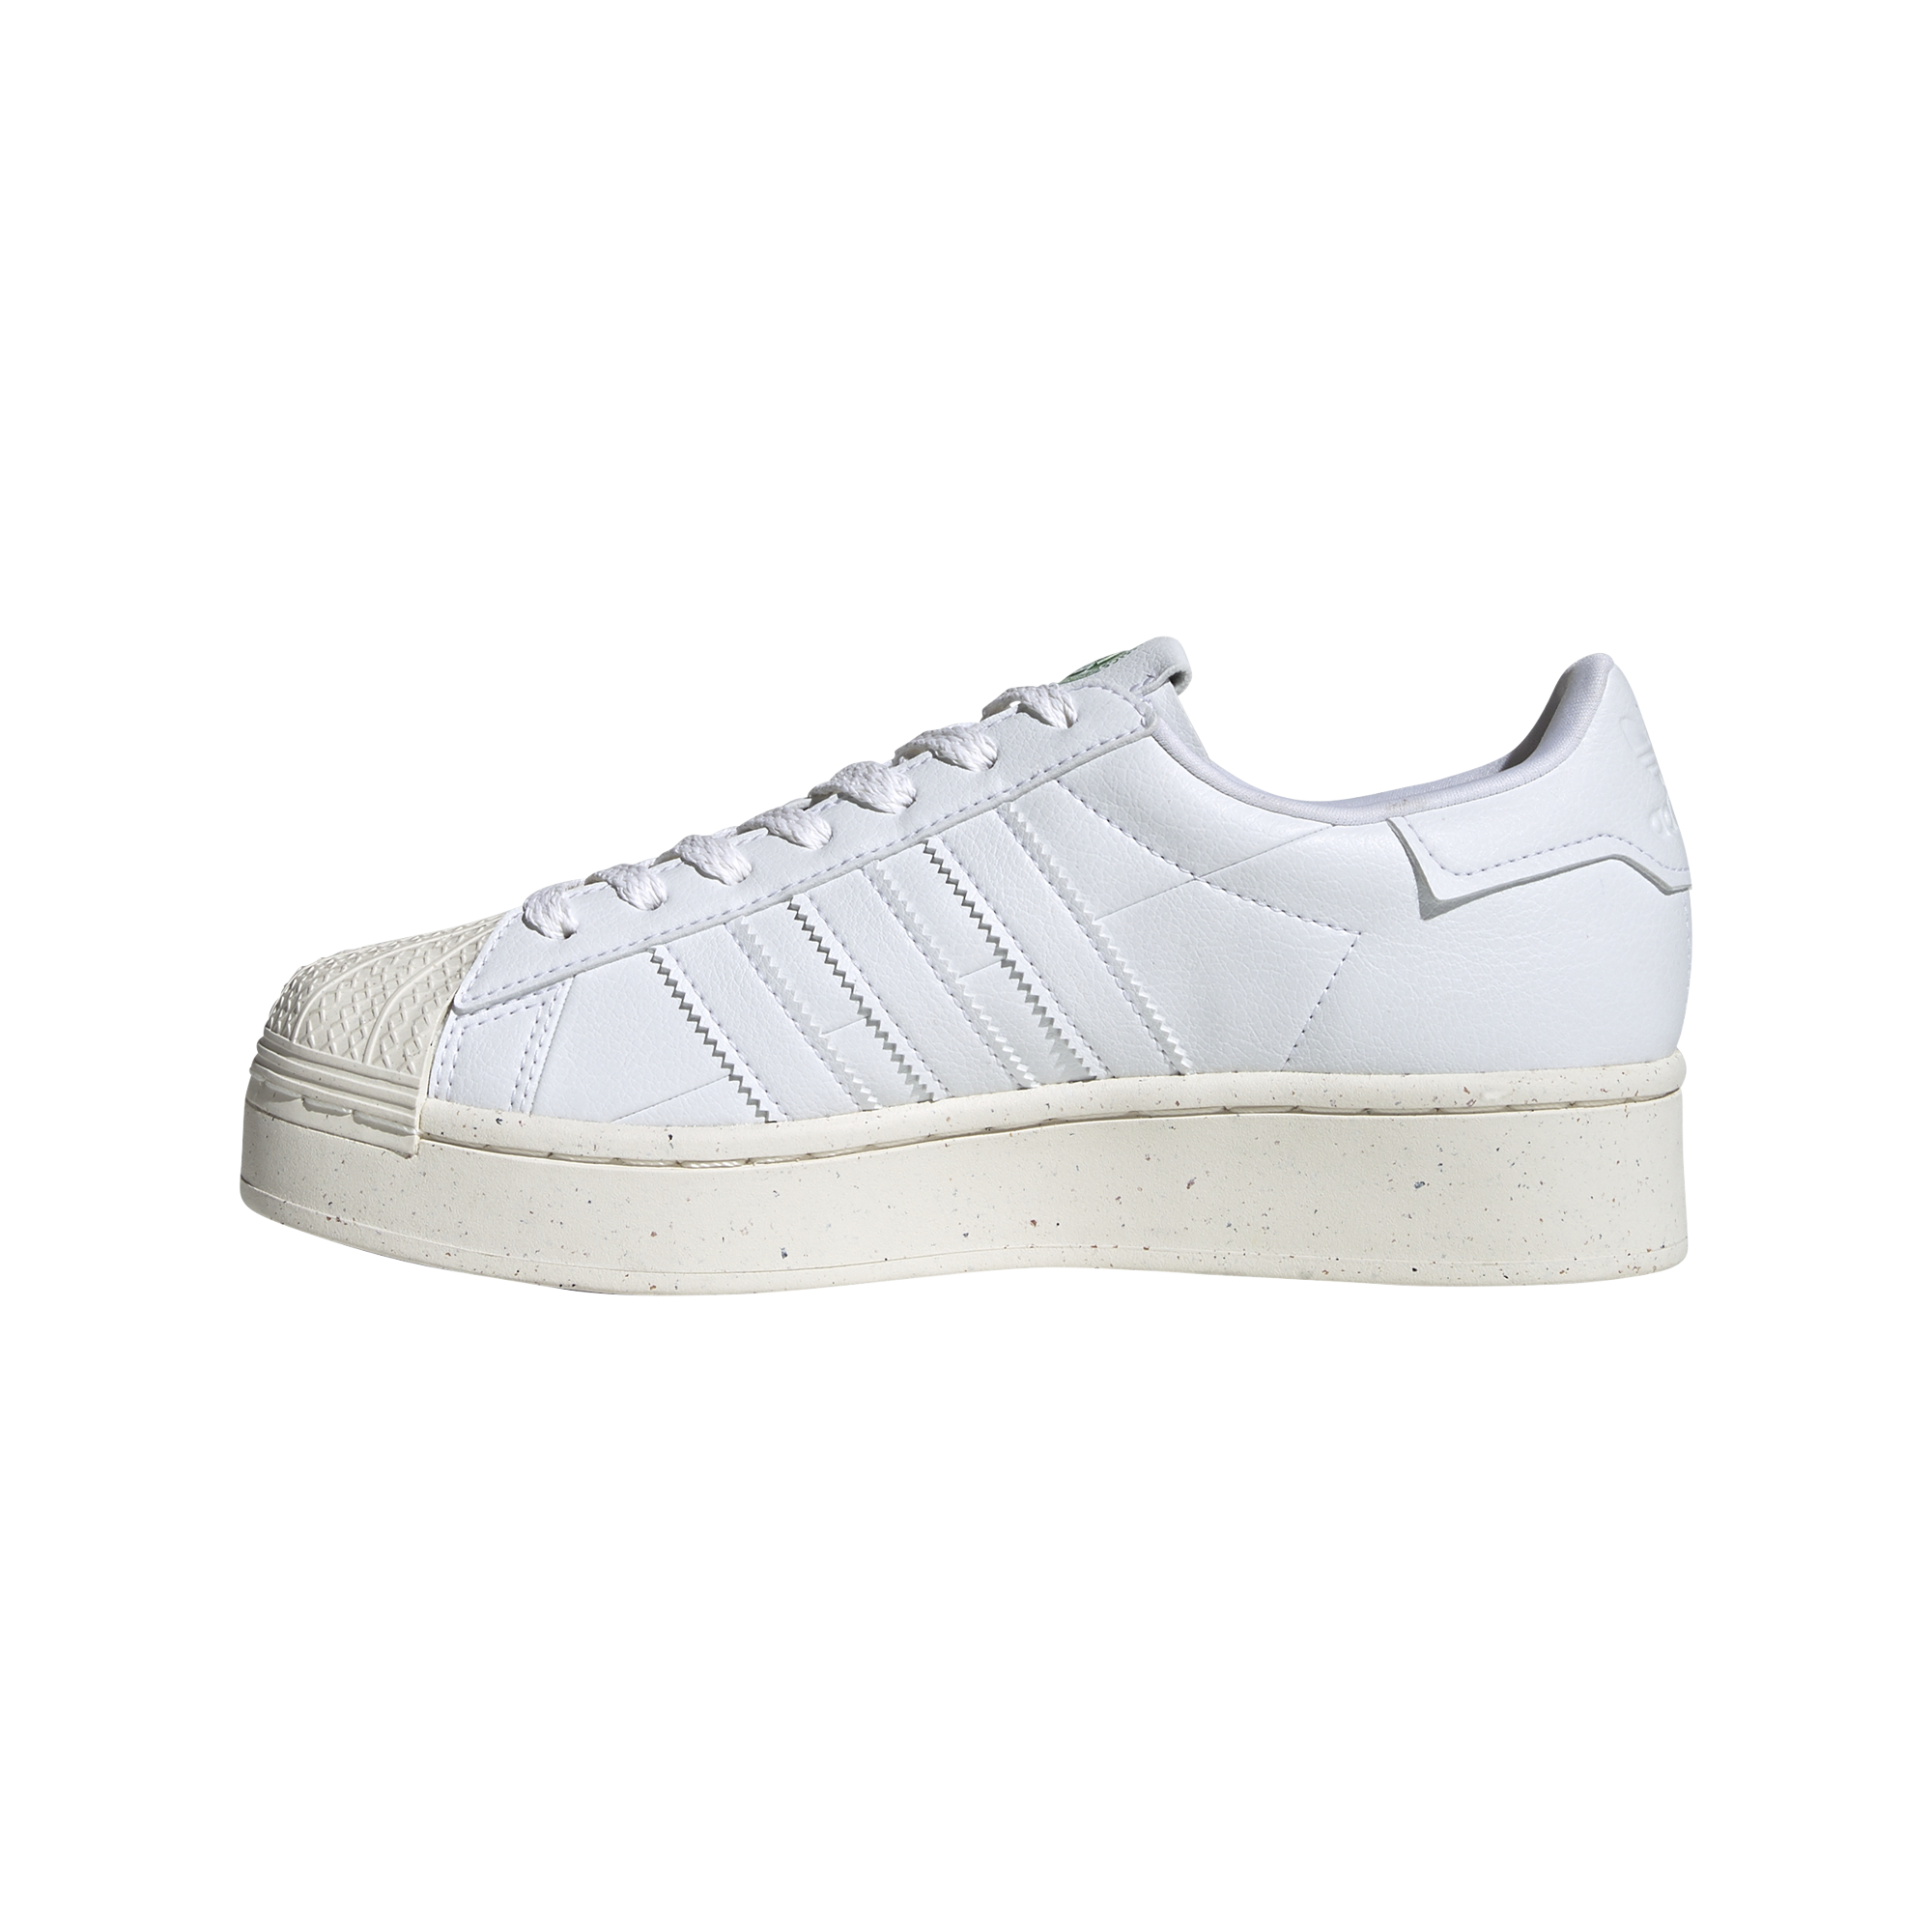 adidas Superstar Bold W Clean Classics Ftw White/ Ftw White/ Off White 59497